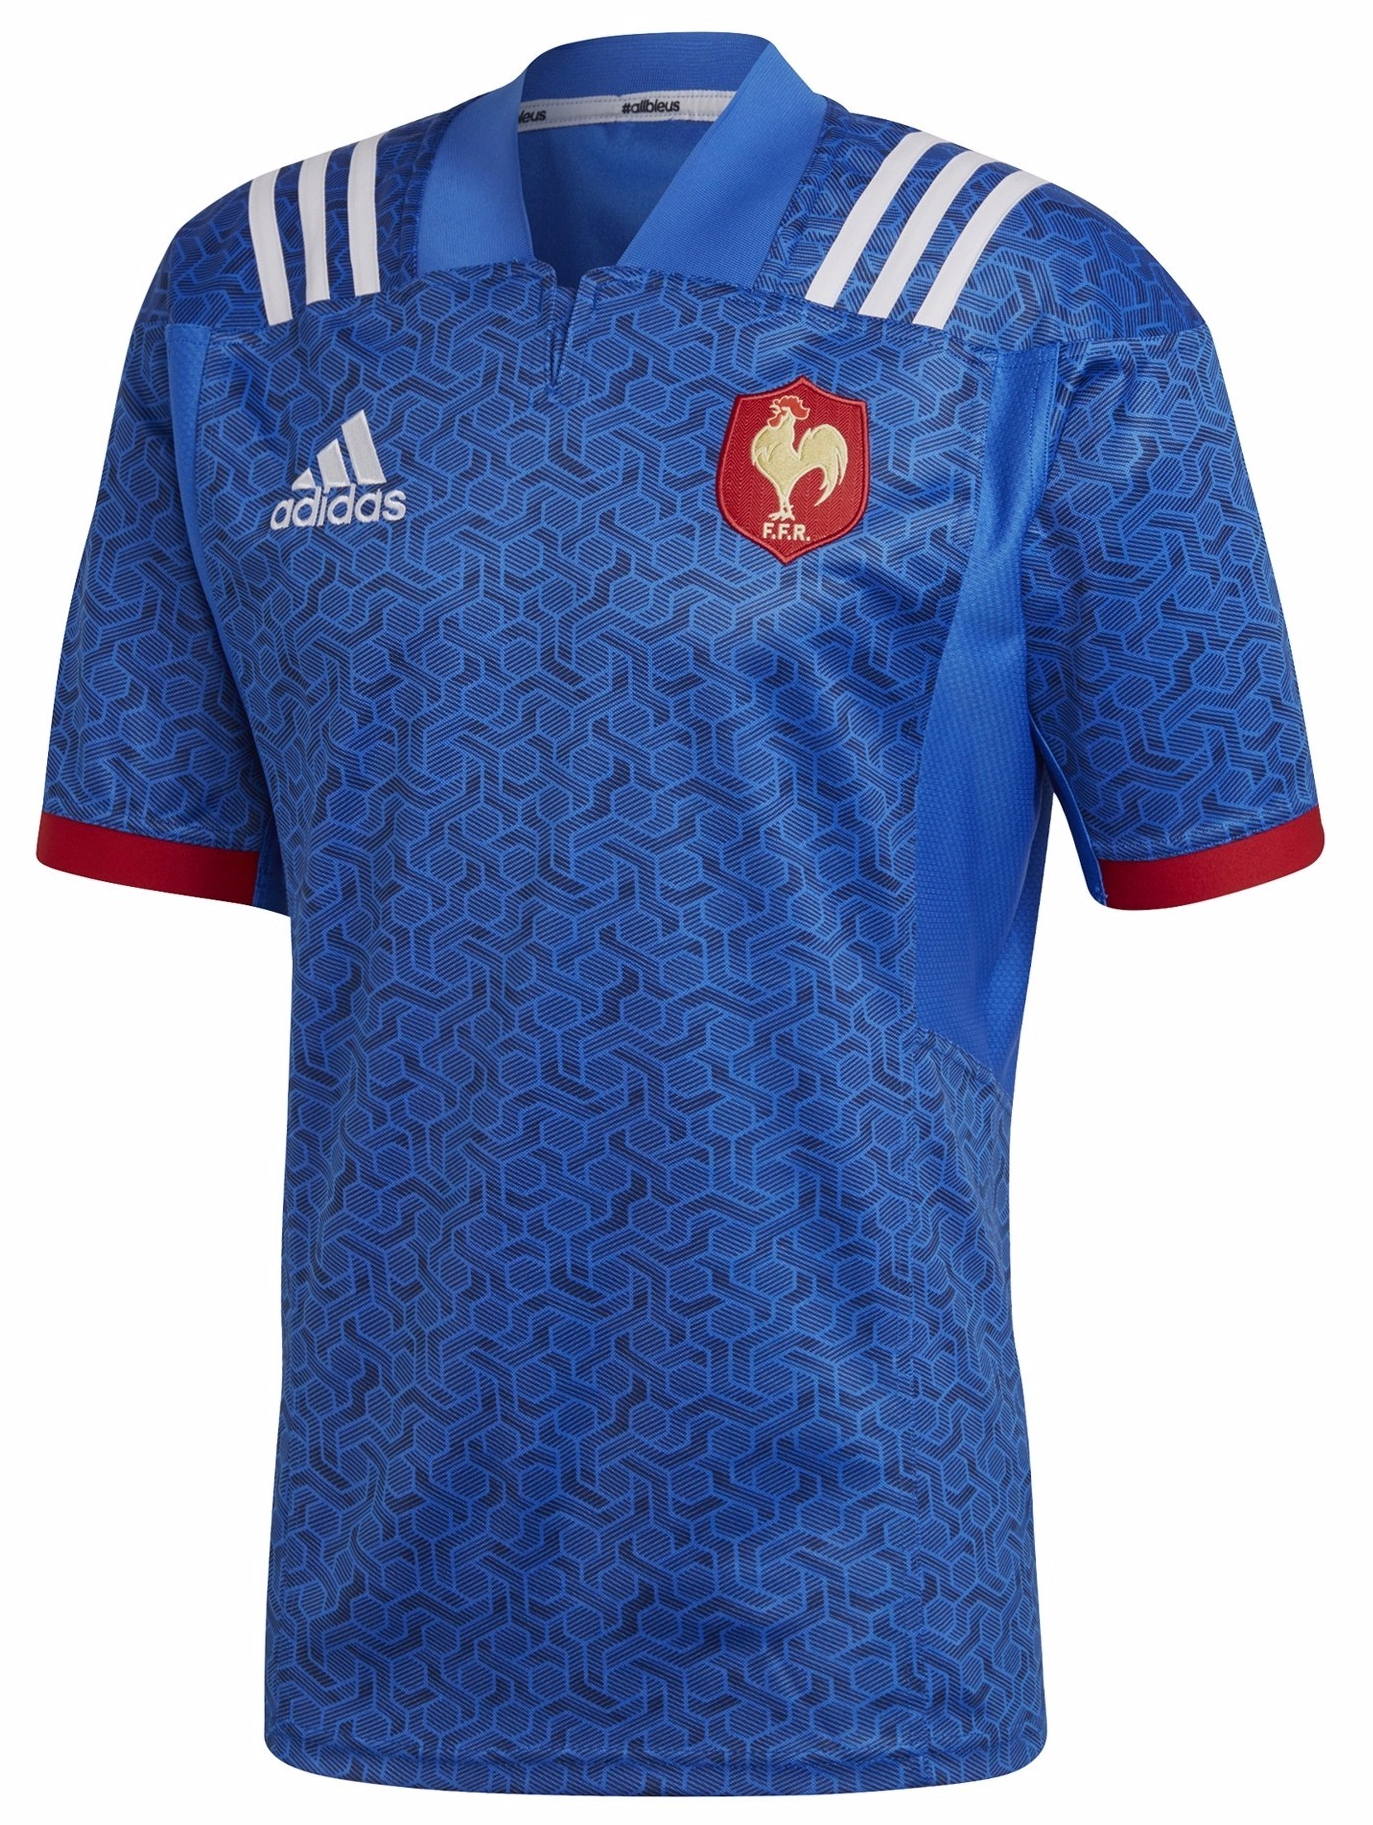 France Rugby 2018 Adidas Home Shirt 